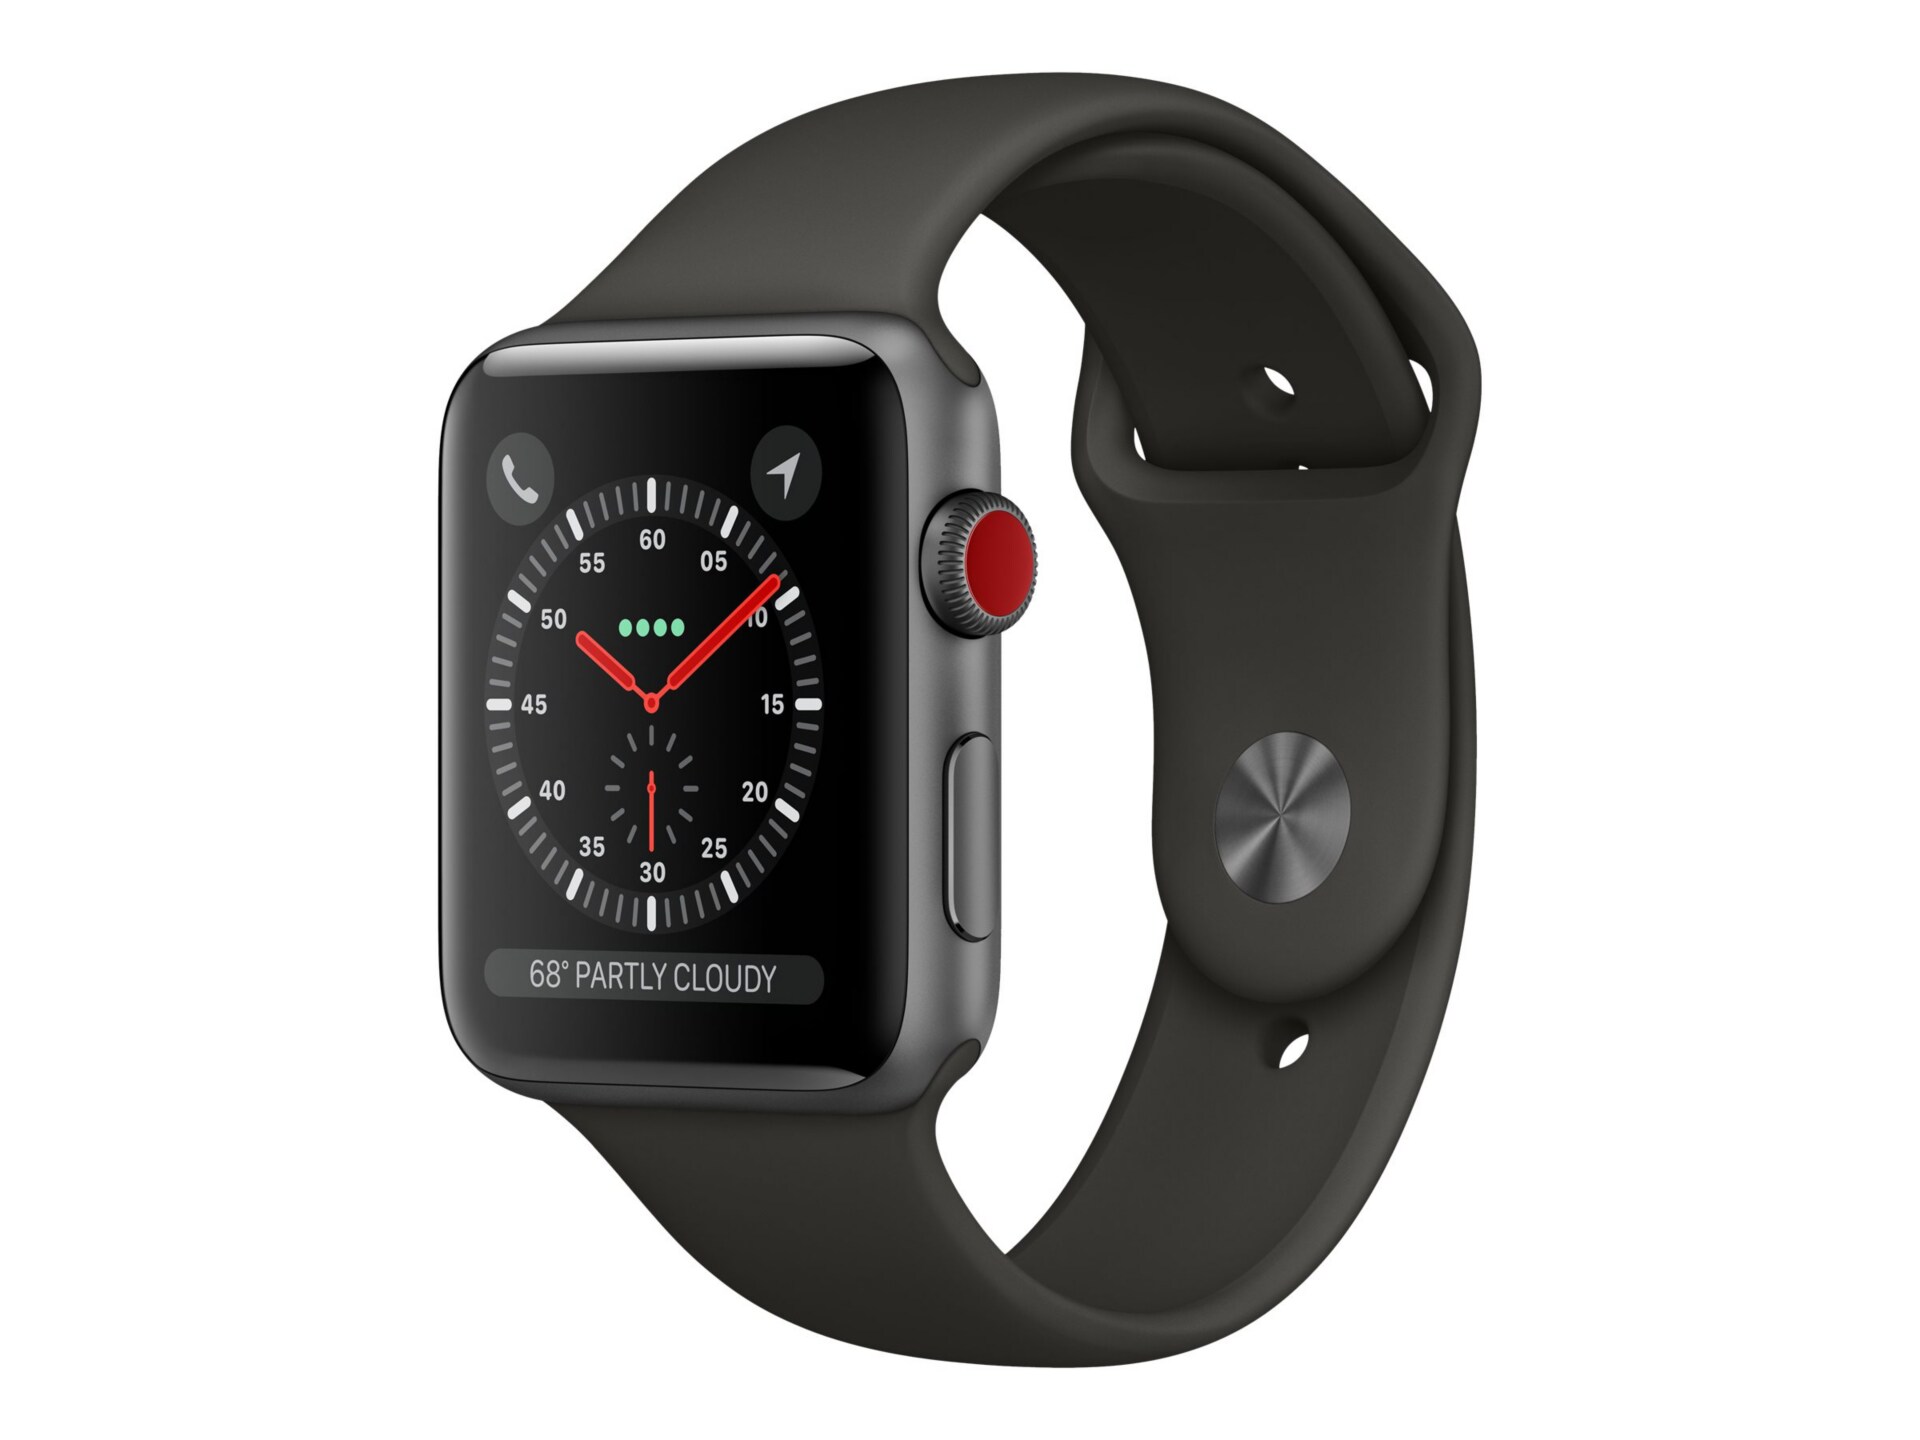 Apple Watch Series 3 (GPS + Cellular) - space gray aluminum - smart watch with sport band - gray - 16 GB - not specified